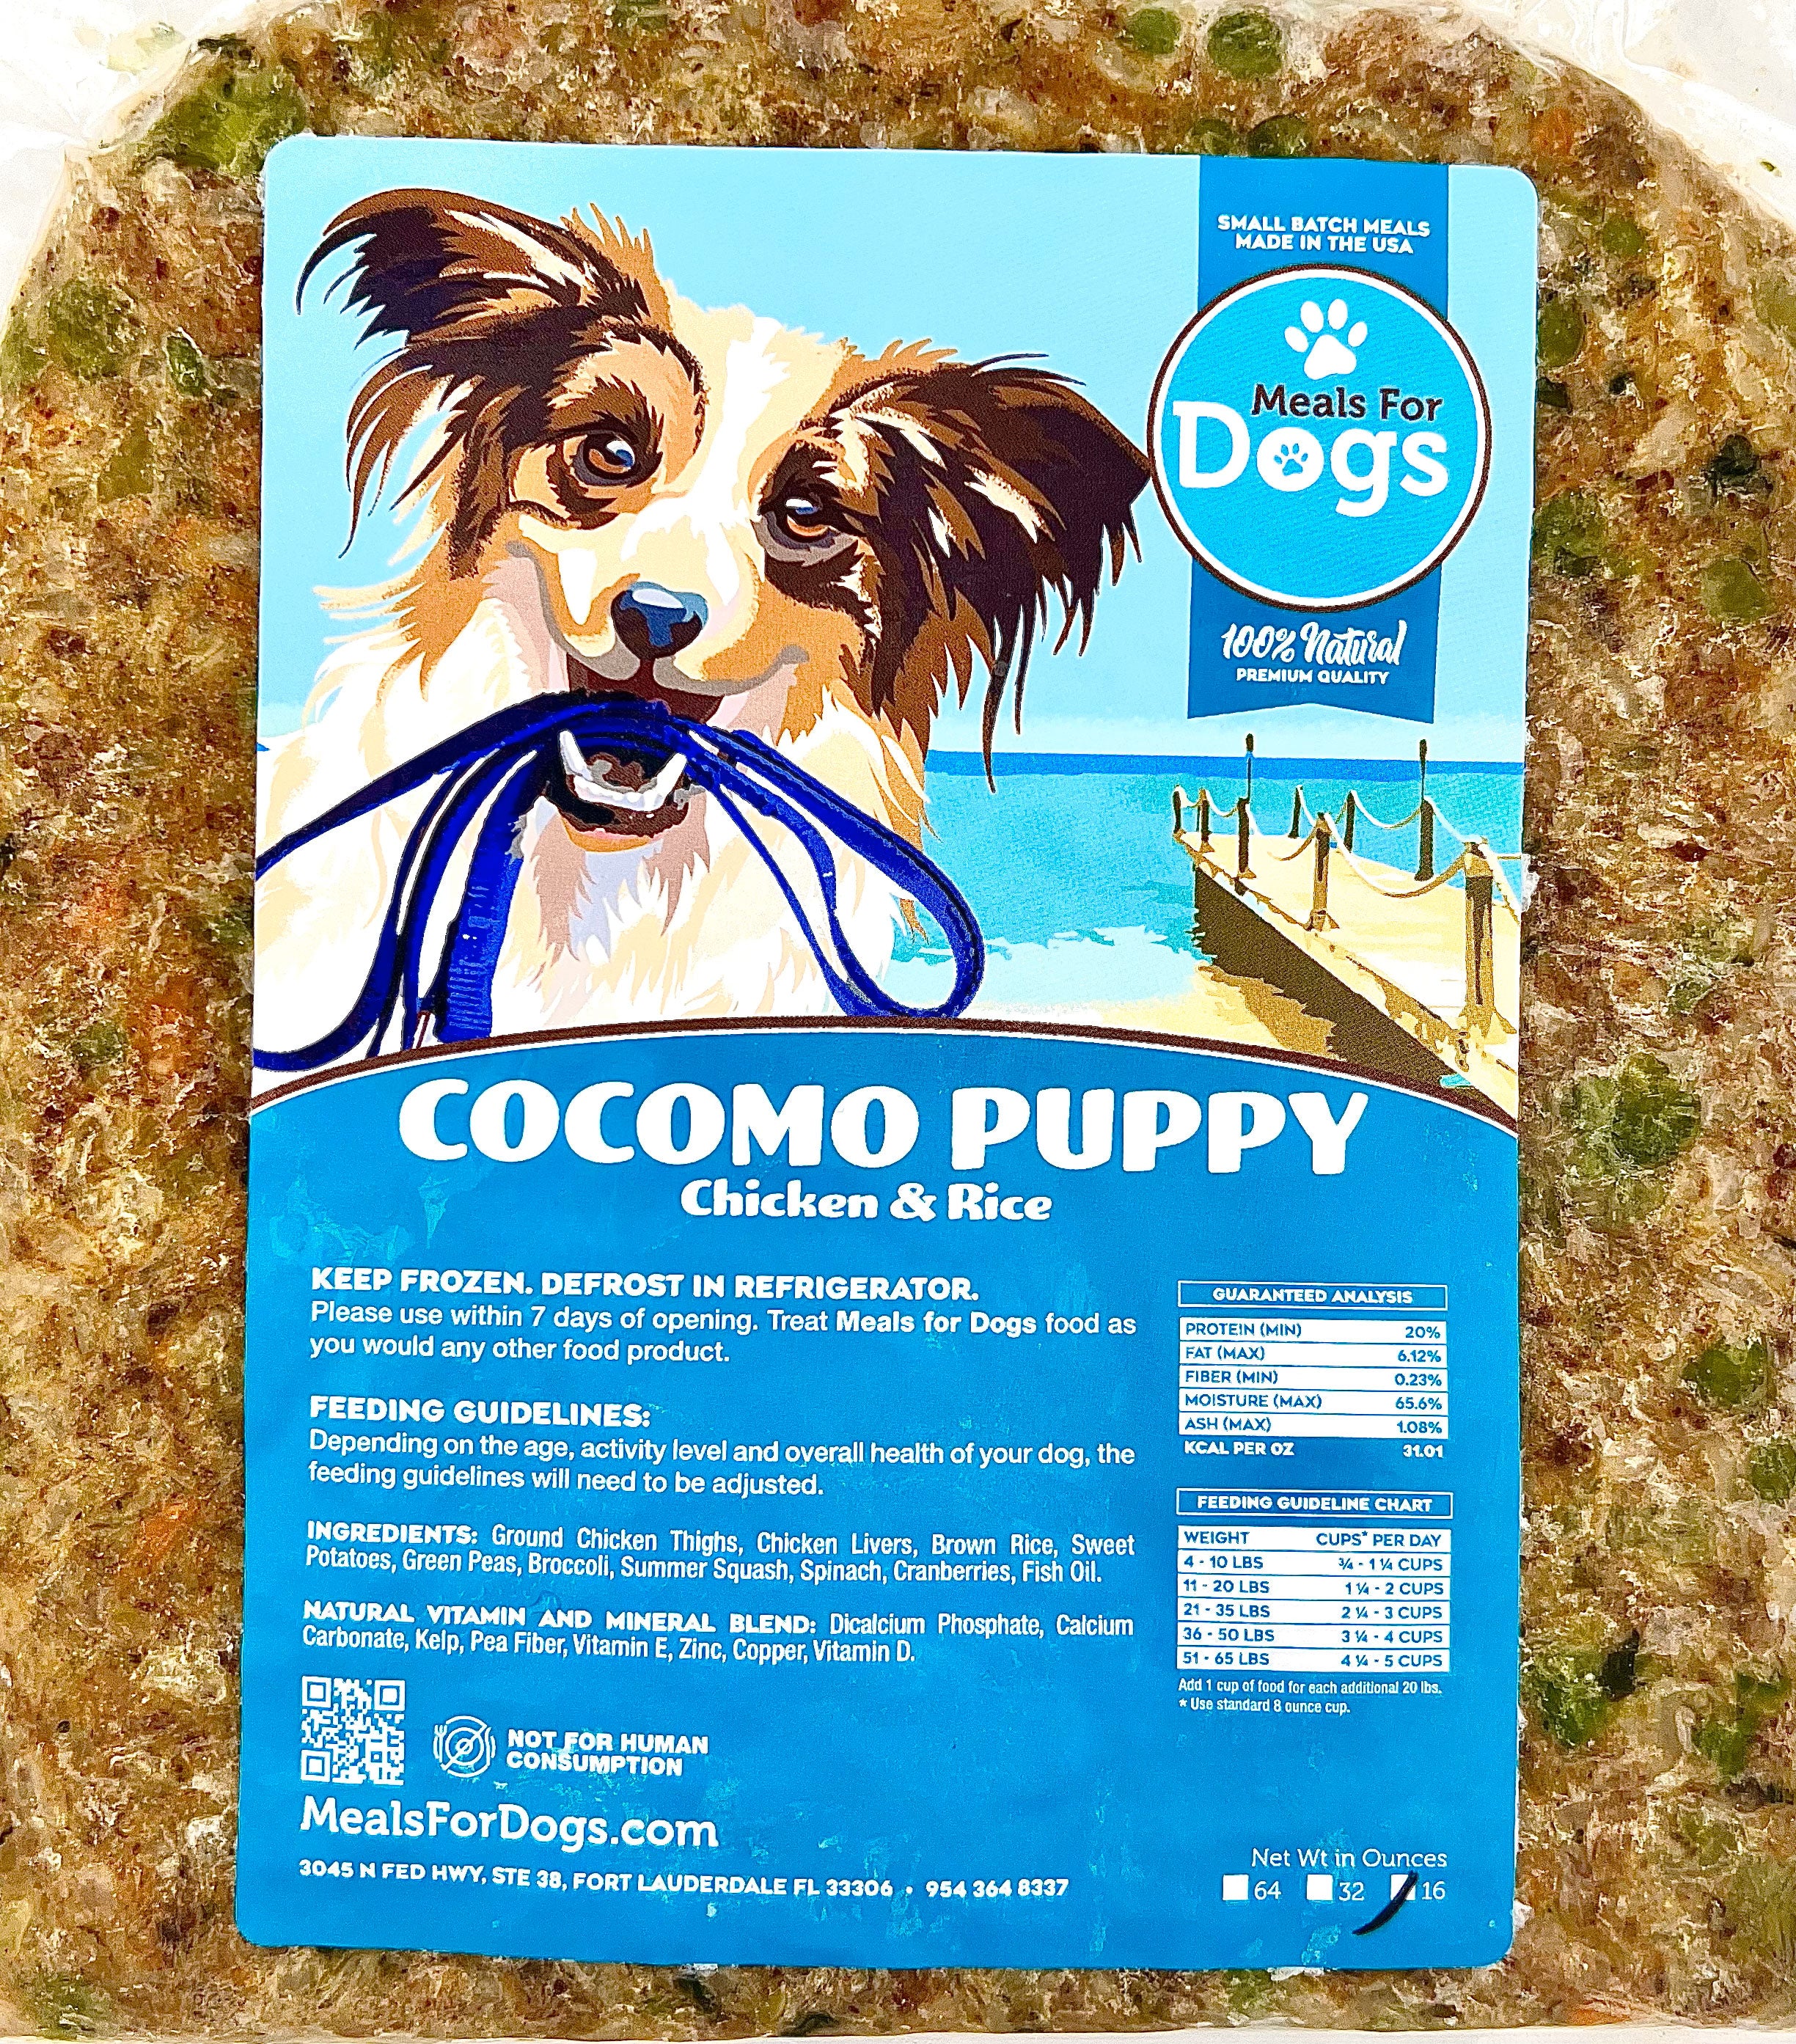 Cocomo Puppy Chicken & Brown Rice Meal | Meals for Dogs